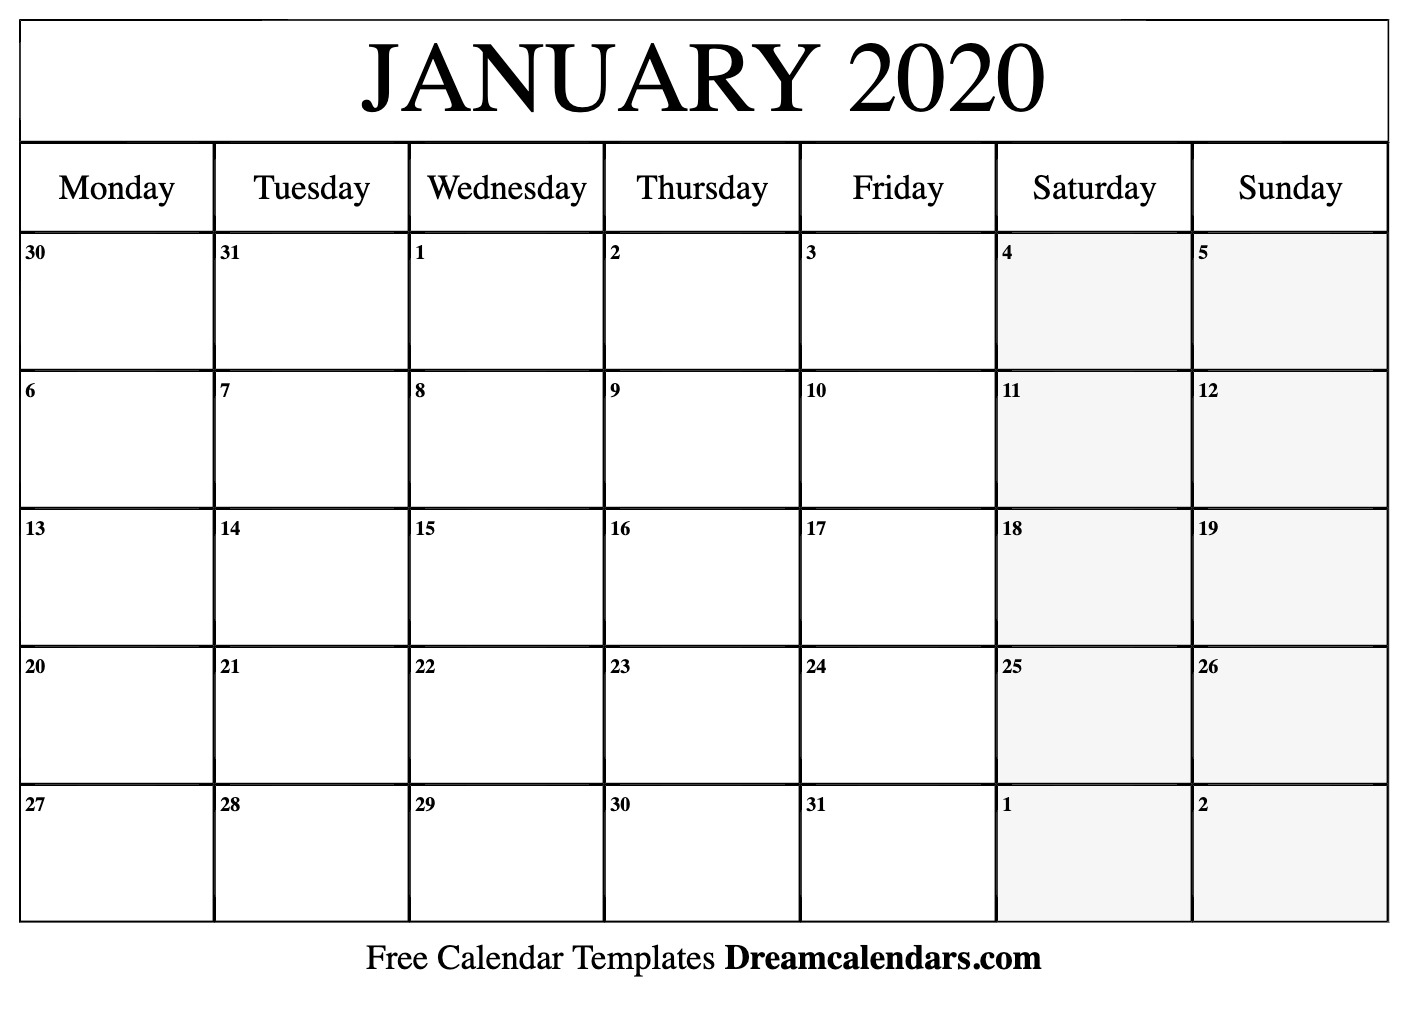 January 2020 Monthly Calendar Date And Time | Calendar